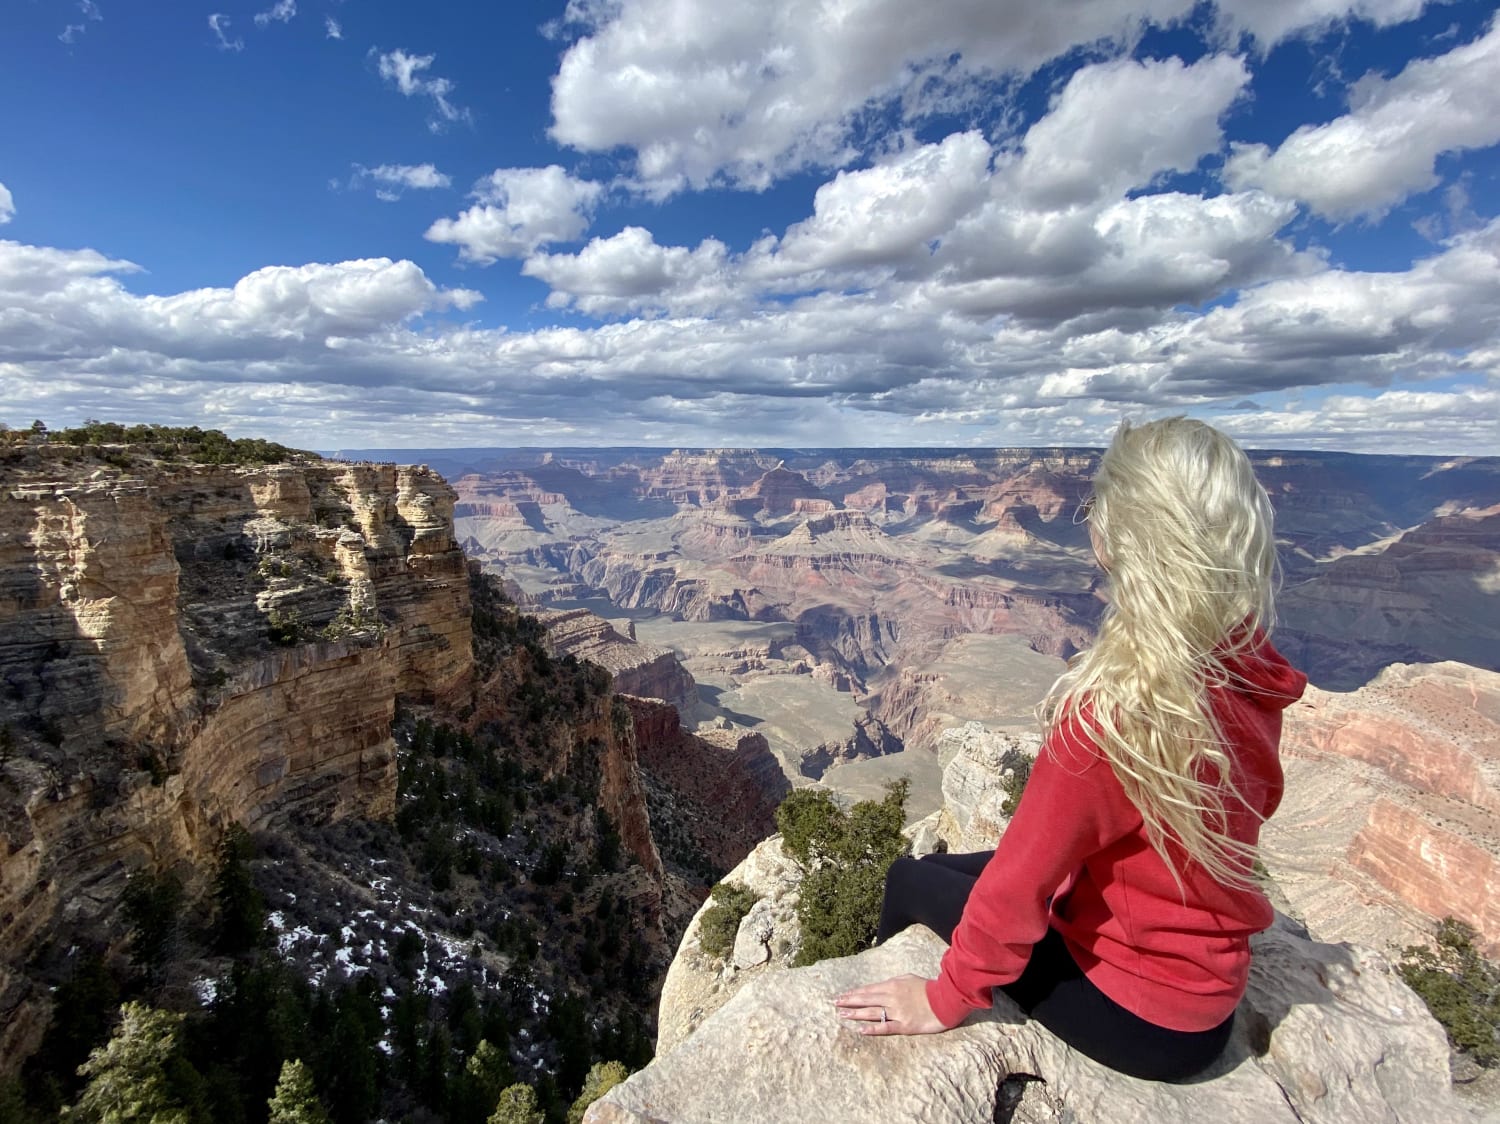 The Grand Canyon and my wife, from earlier this year. It was my first time there! Awe-inspiring.